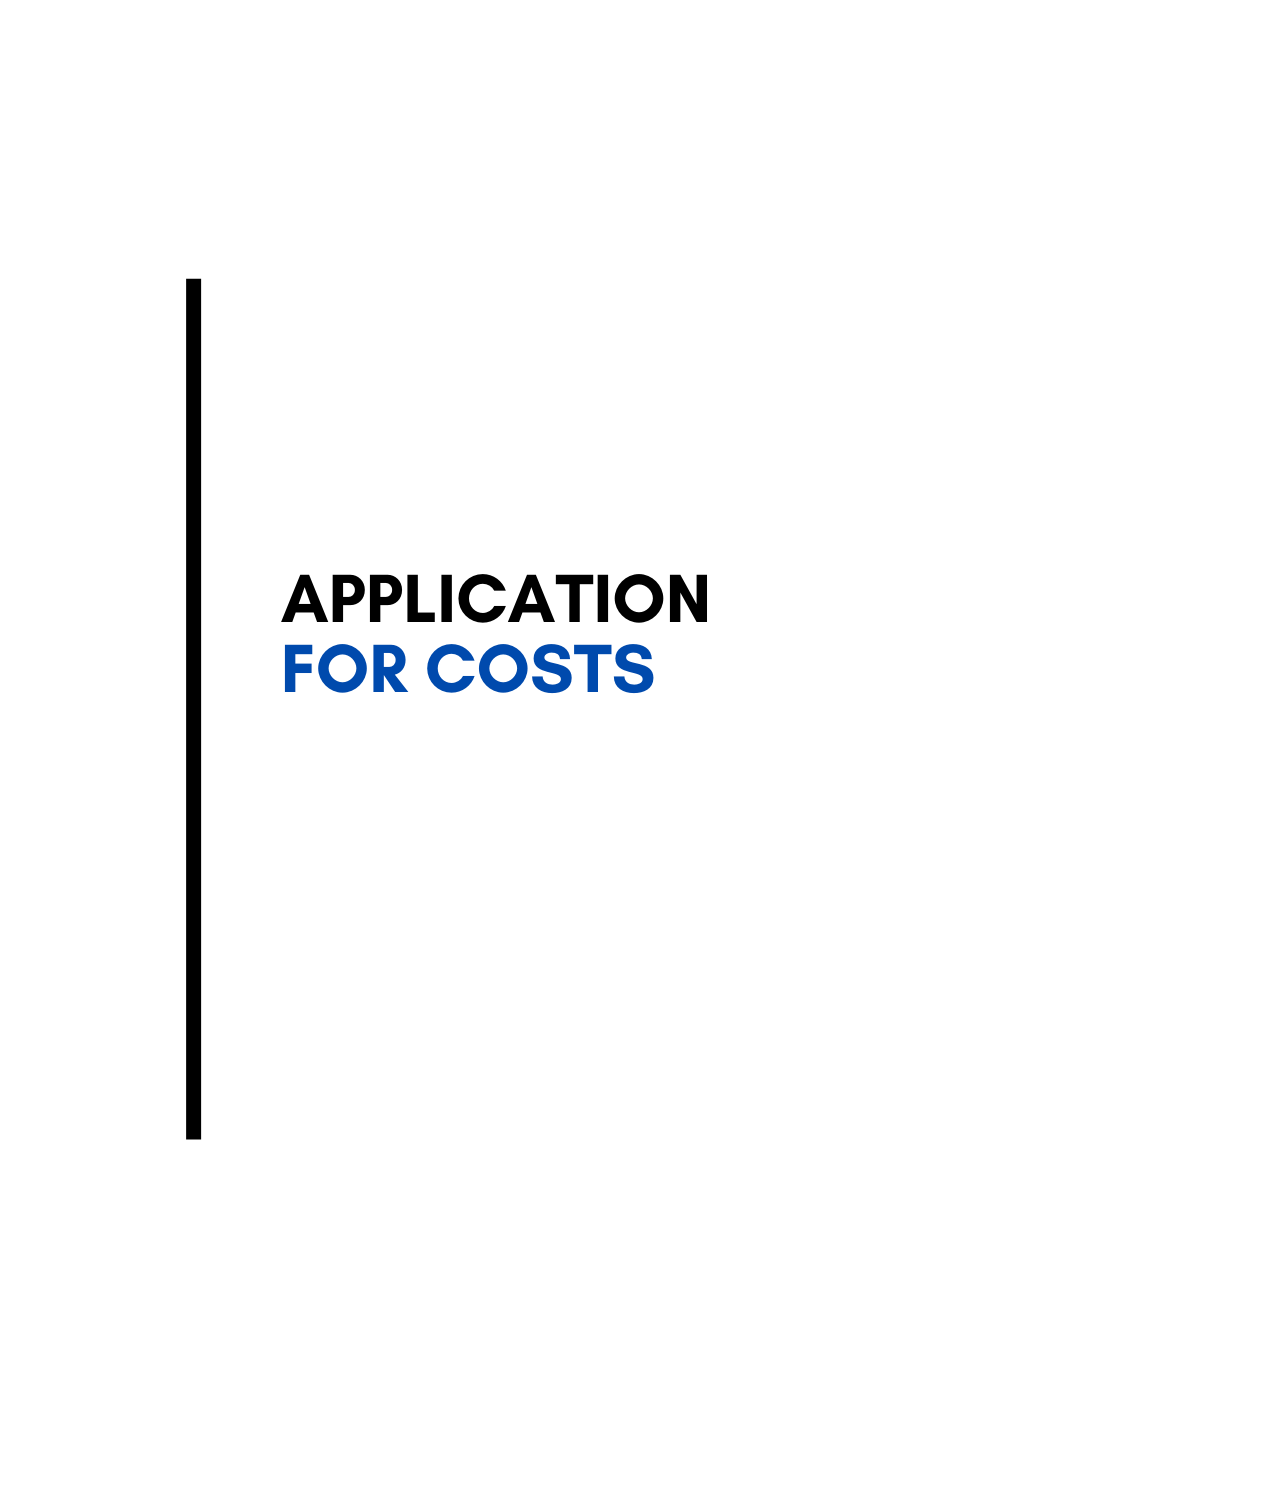 Application for Costs